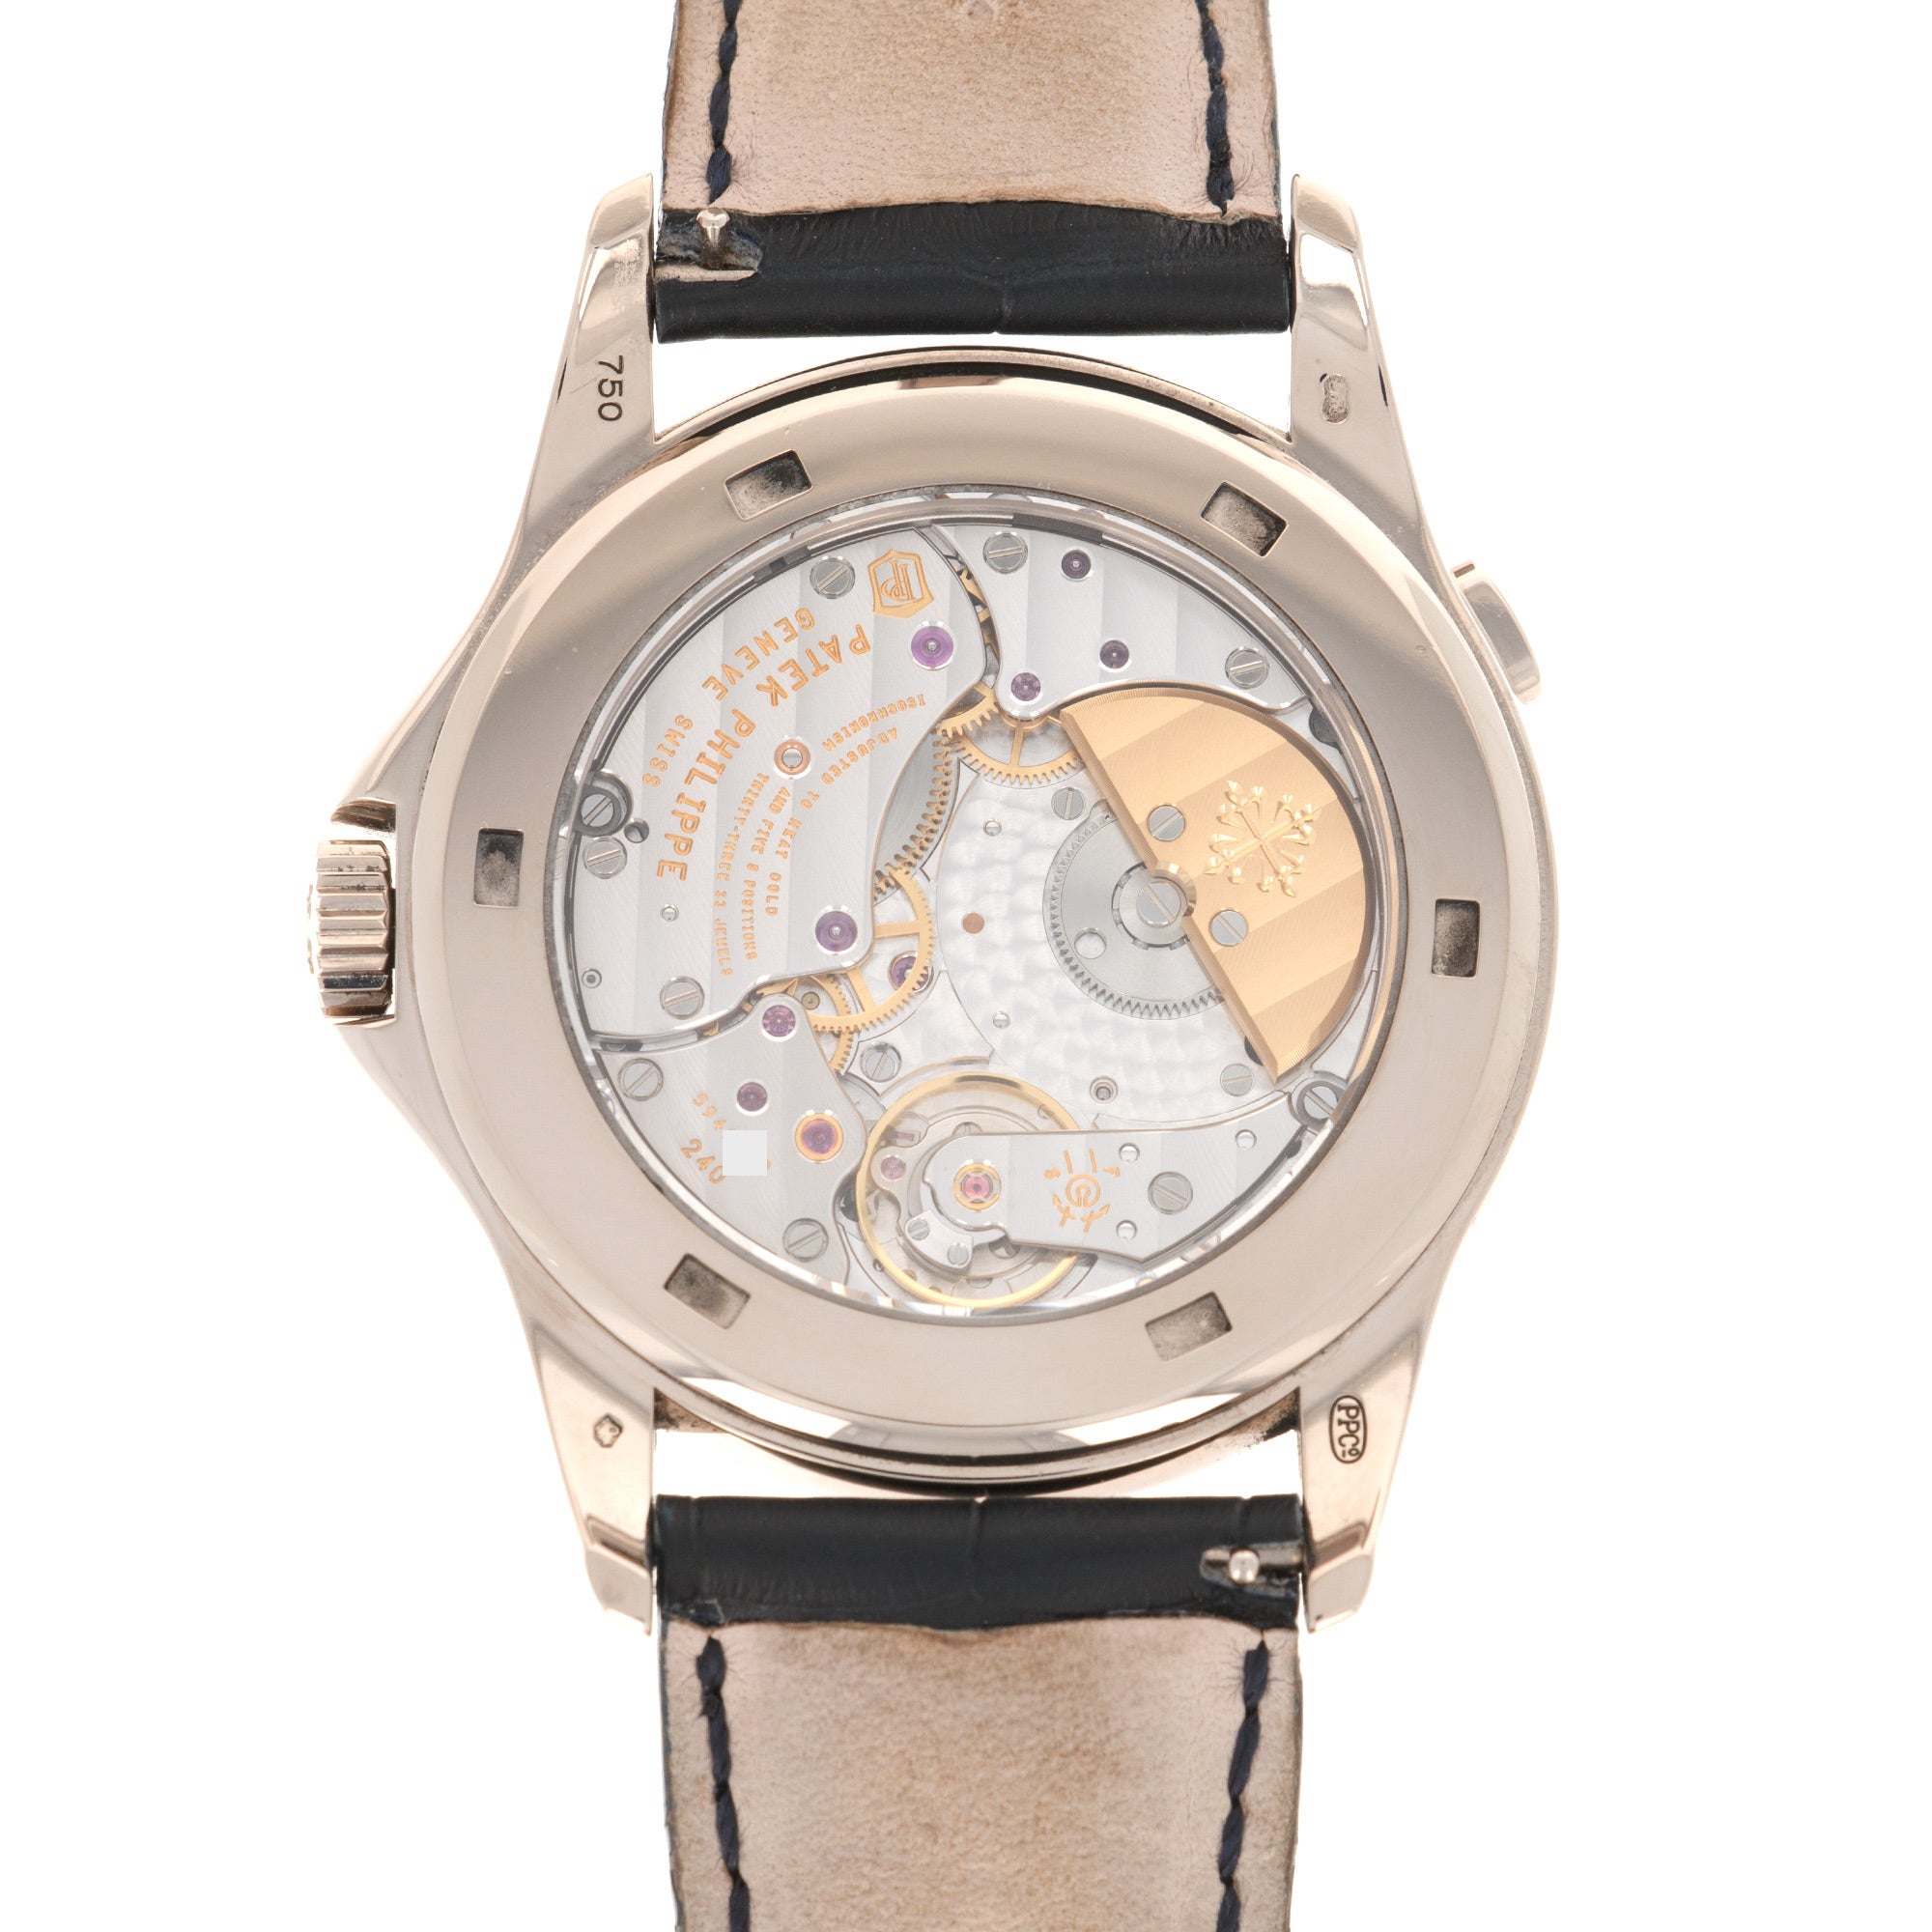 Patek Philippe White Gold World Time Watch Ref. 5130, Retailed by Tiffany &amp; Co.